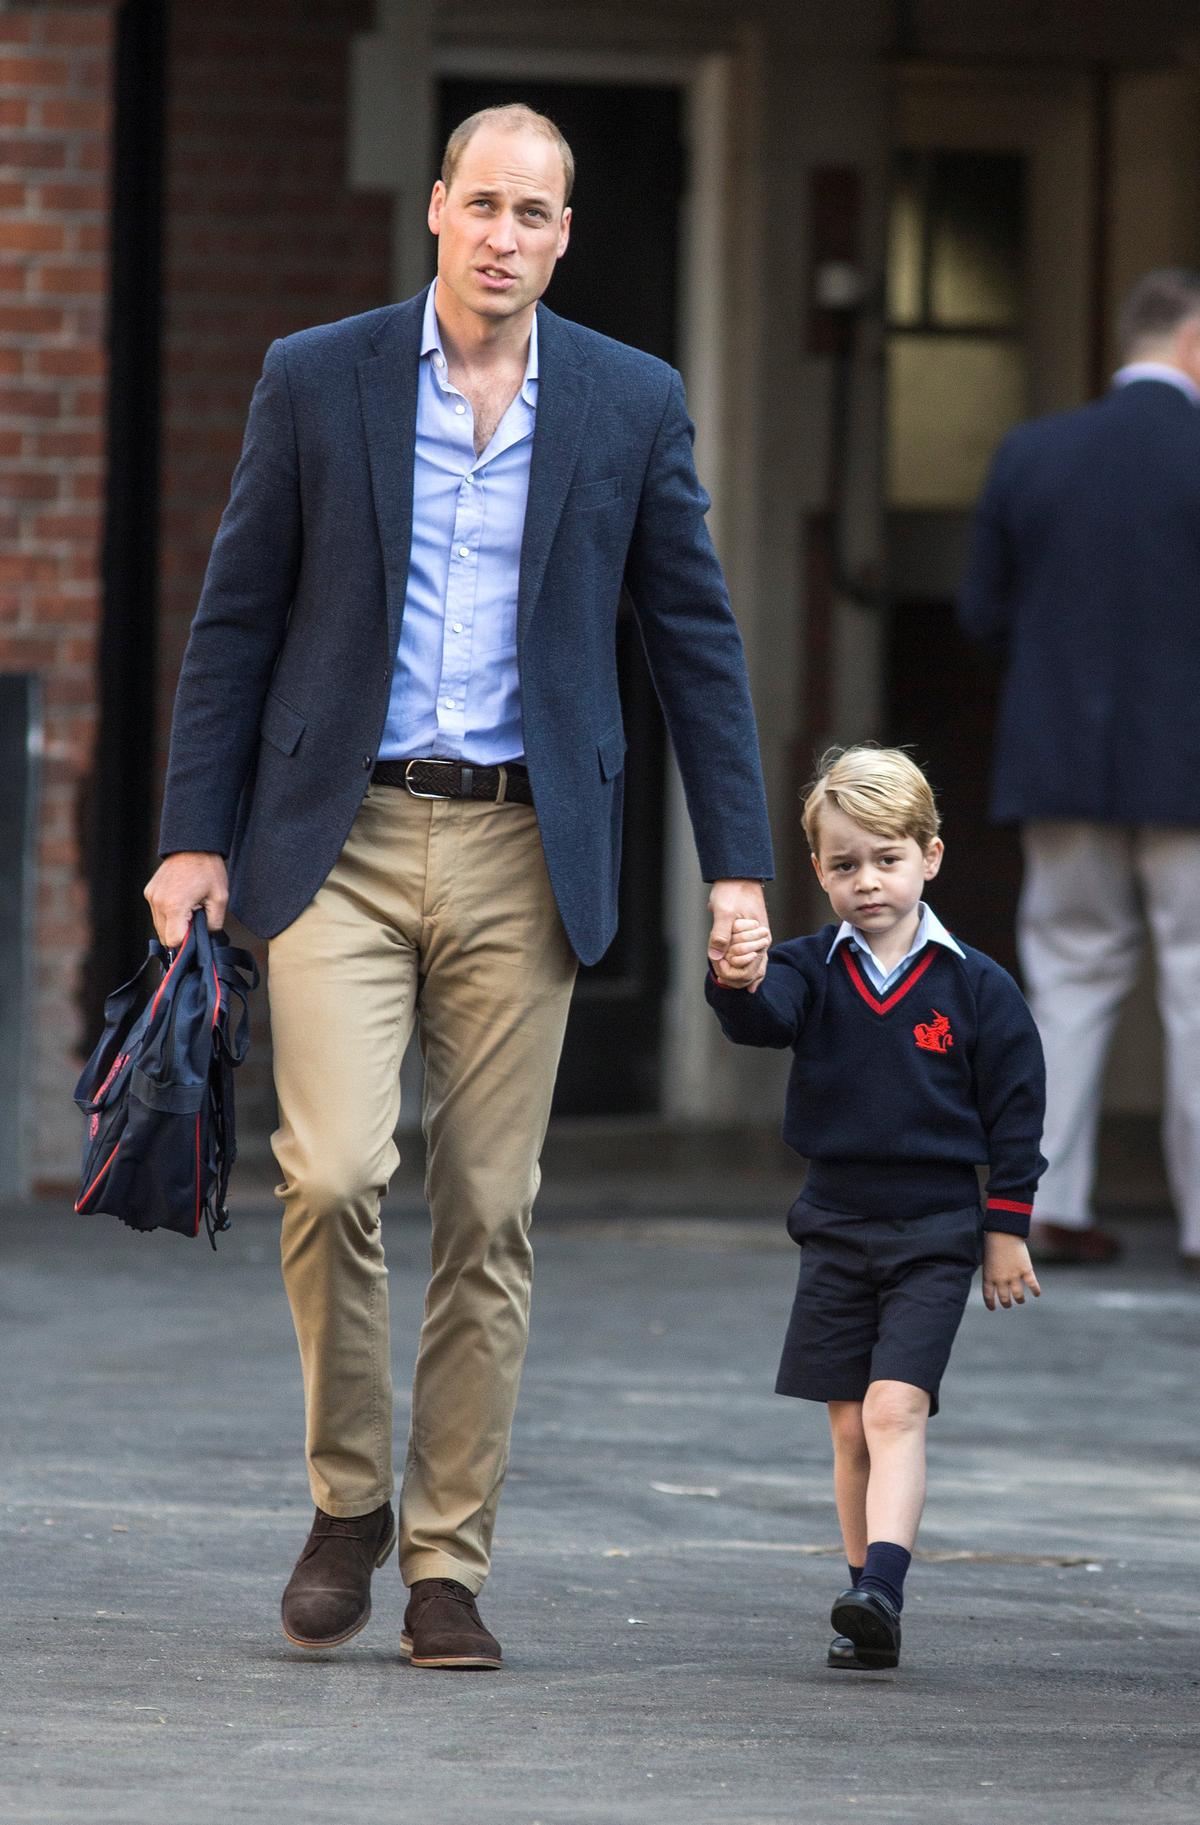 Britain's Prince William accompanies his son Prince George on his first day of school at Thomas's school in Battersea, London, Sept. 7, 2017. (REUTERS/Richard Pohle/Pool)